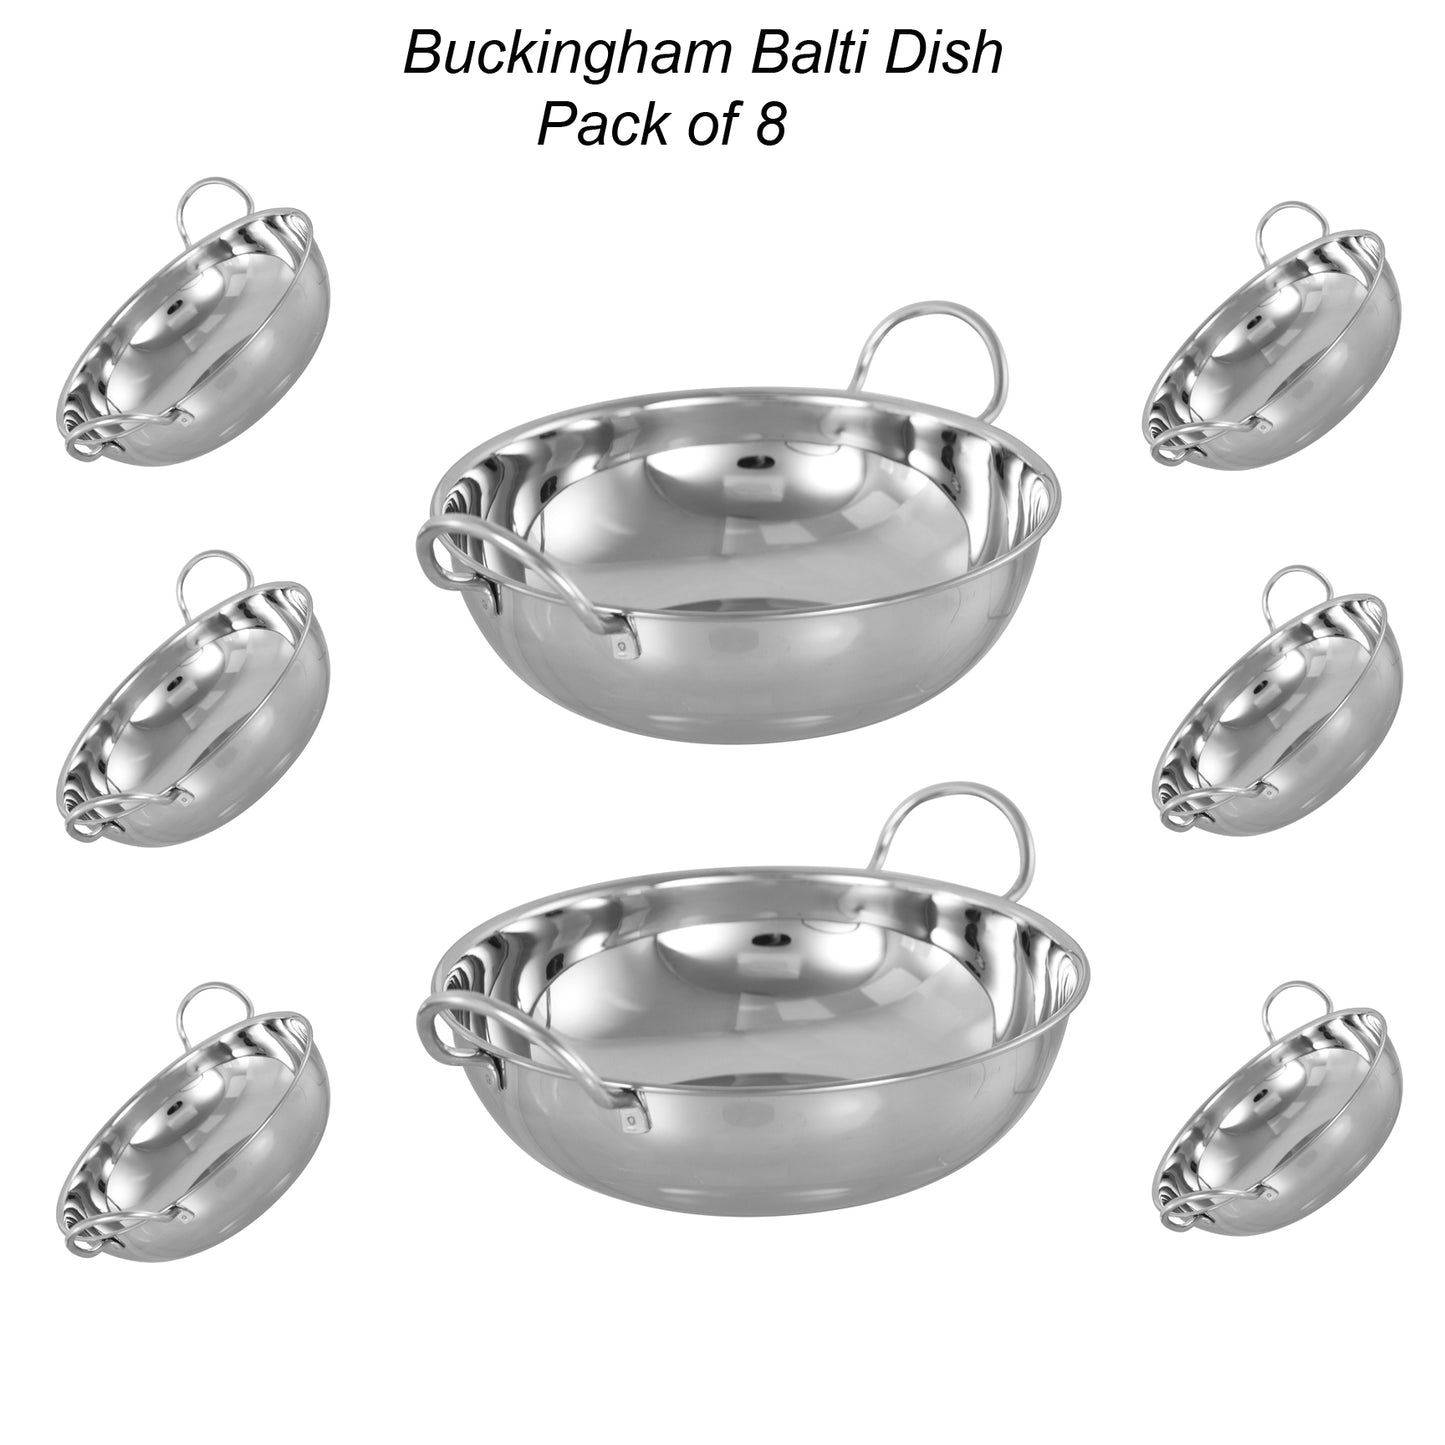 Buckingham Stainless Steel Balti Dish Indian Curry Food Serving Dish 15 cm, Pack of 8